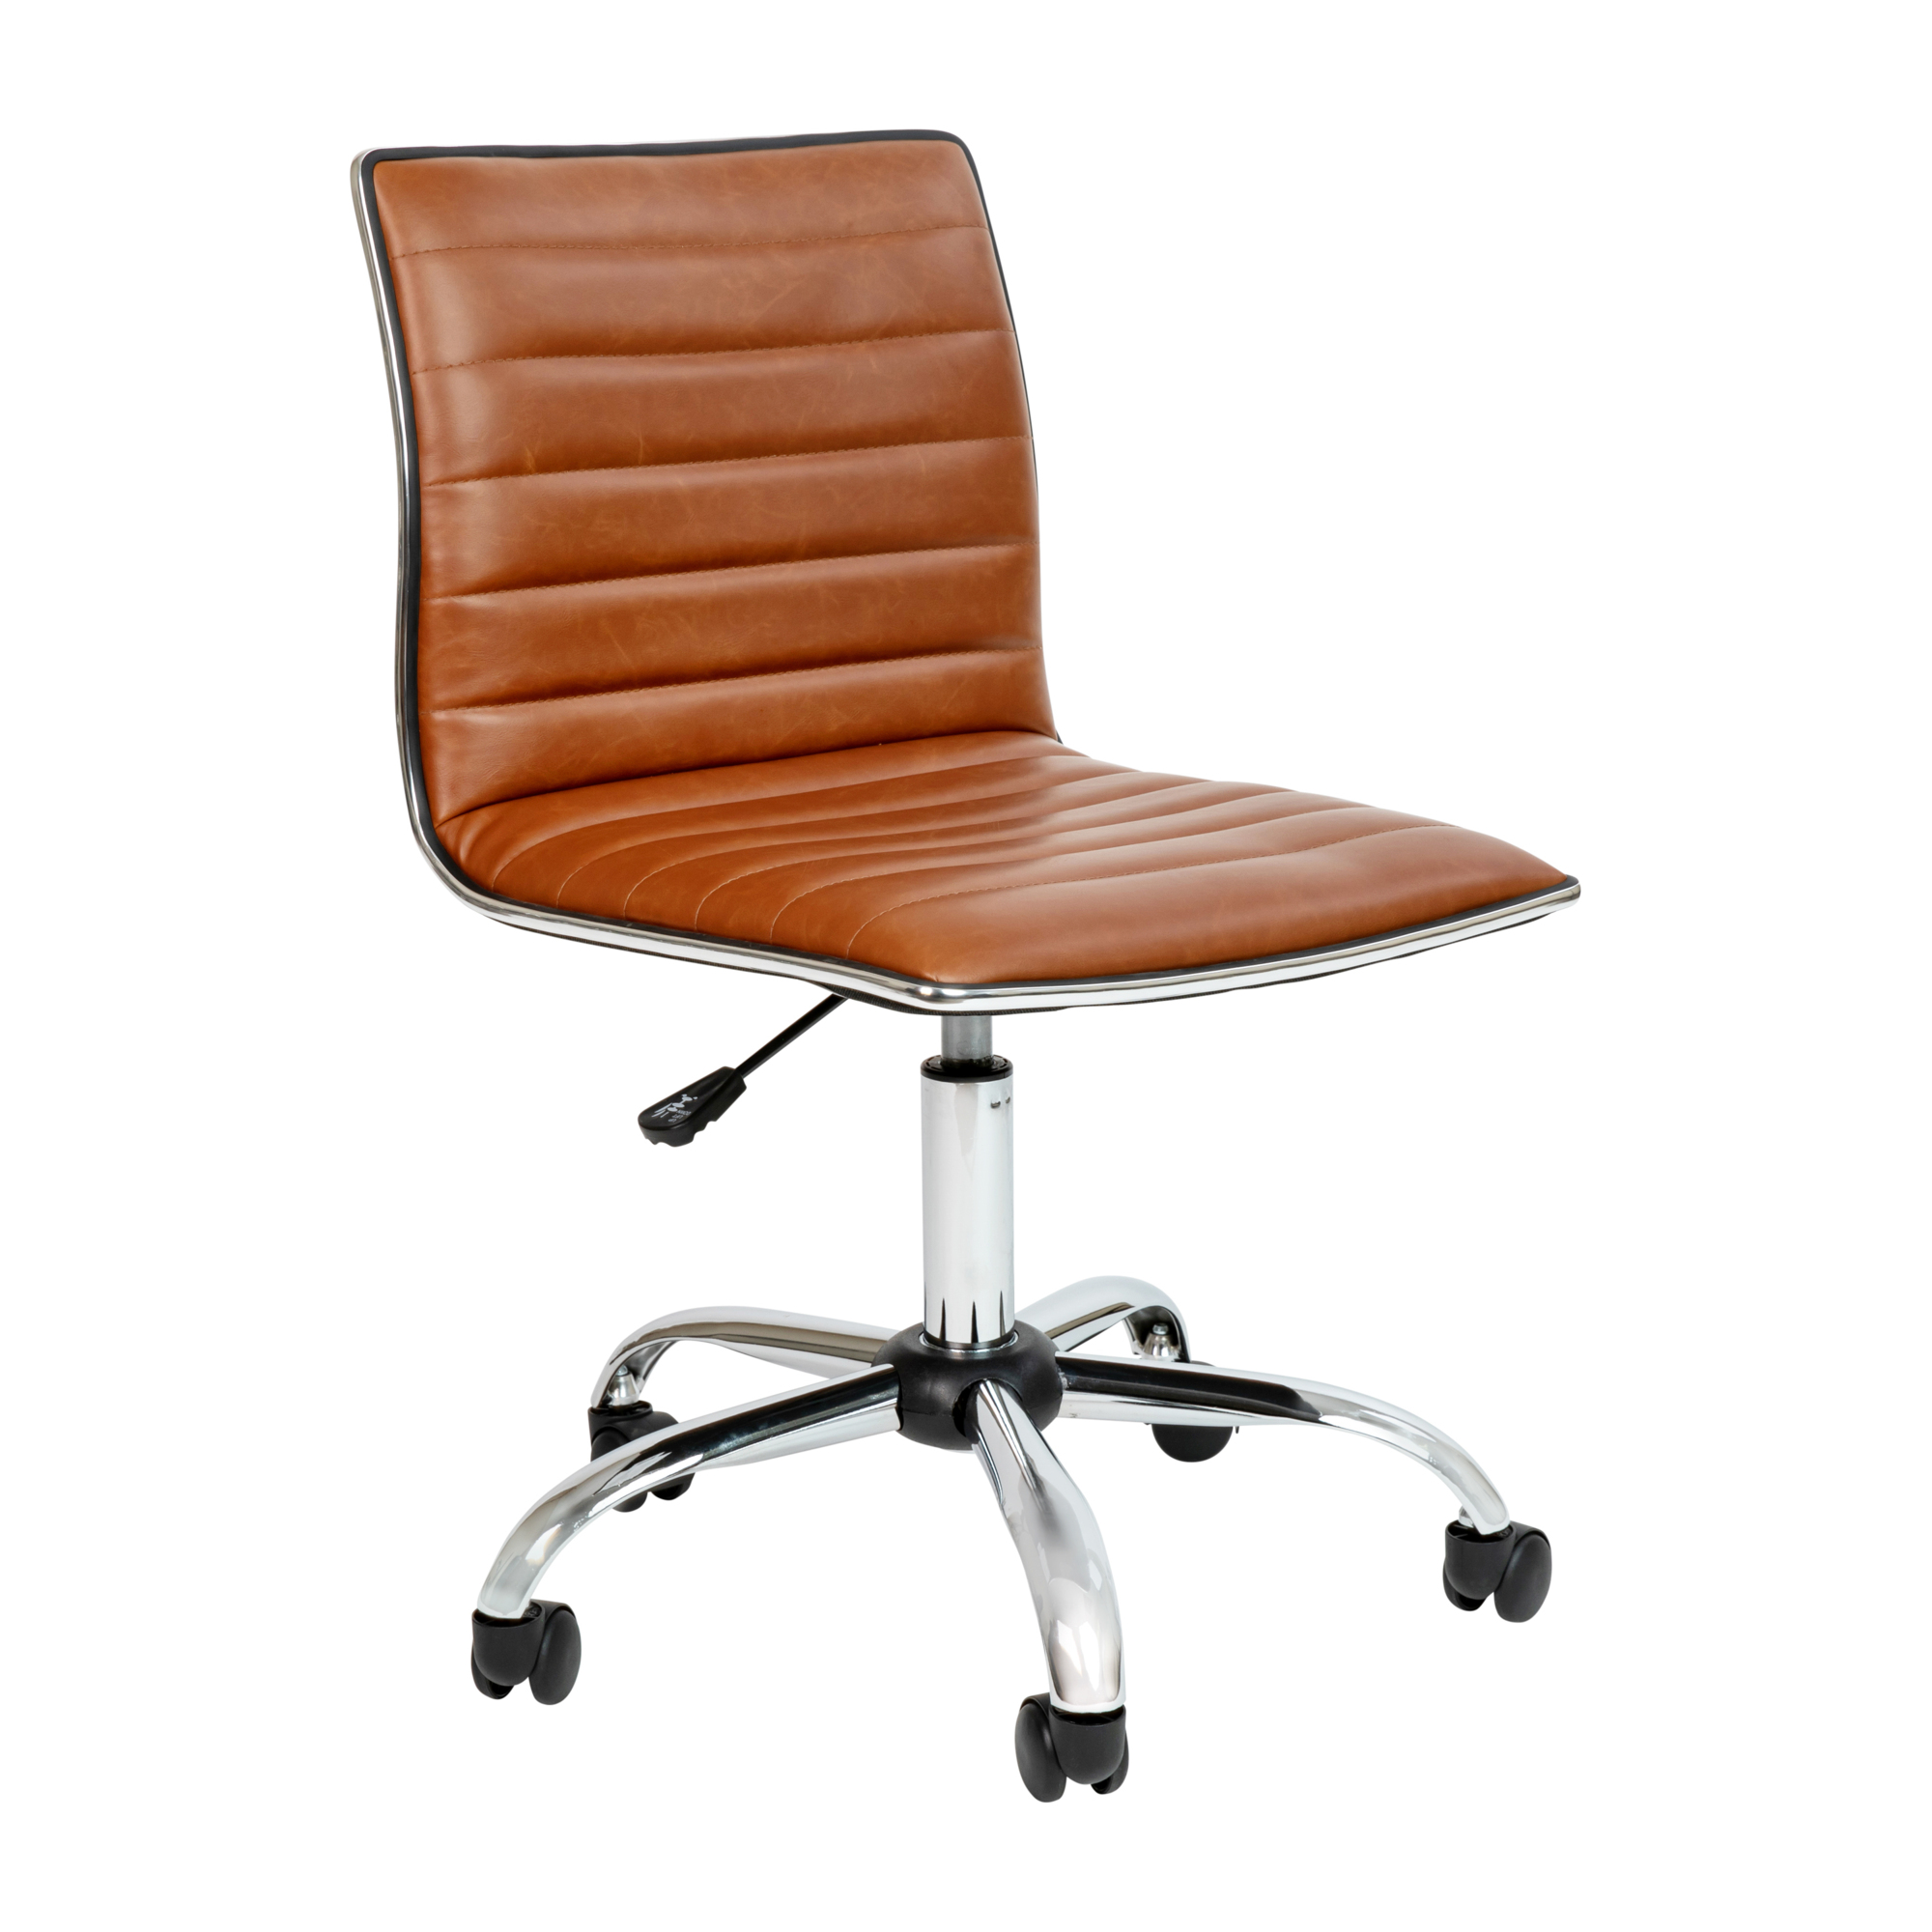 Flash Furniture, Armless Brown Ribbed Swivel Task Office Chair, Primary Color Brown, Included (qty.) 1, Model DS512BBR